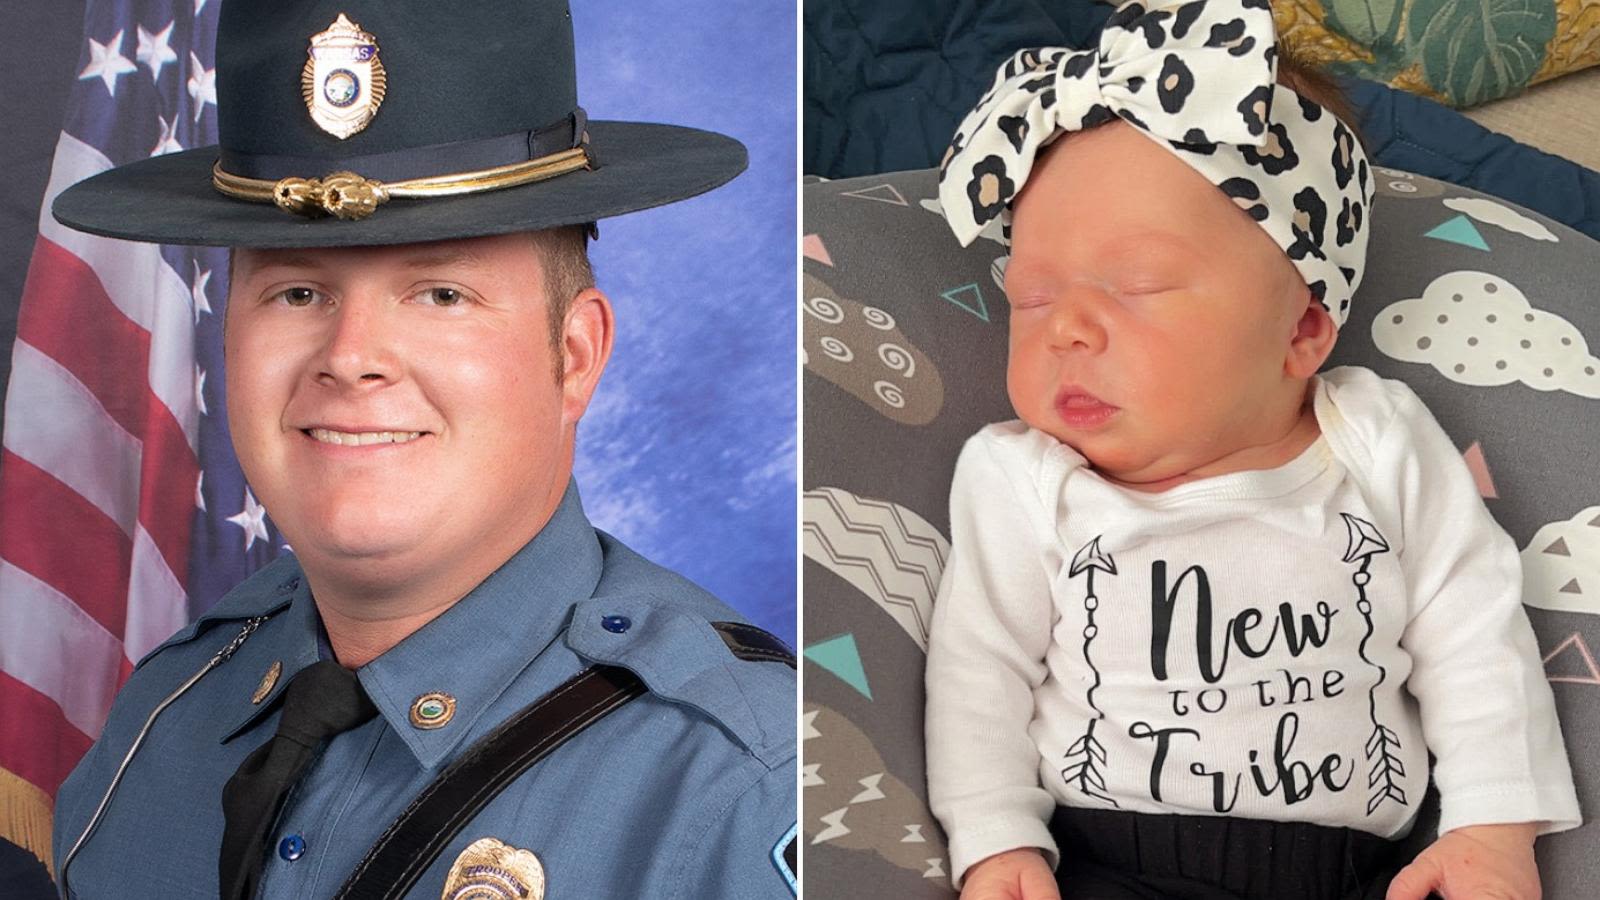 Trooper hailed as a hero after saving baby who stopped breathing